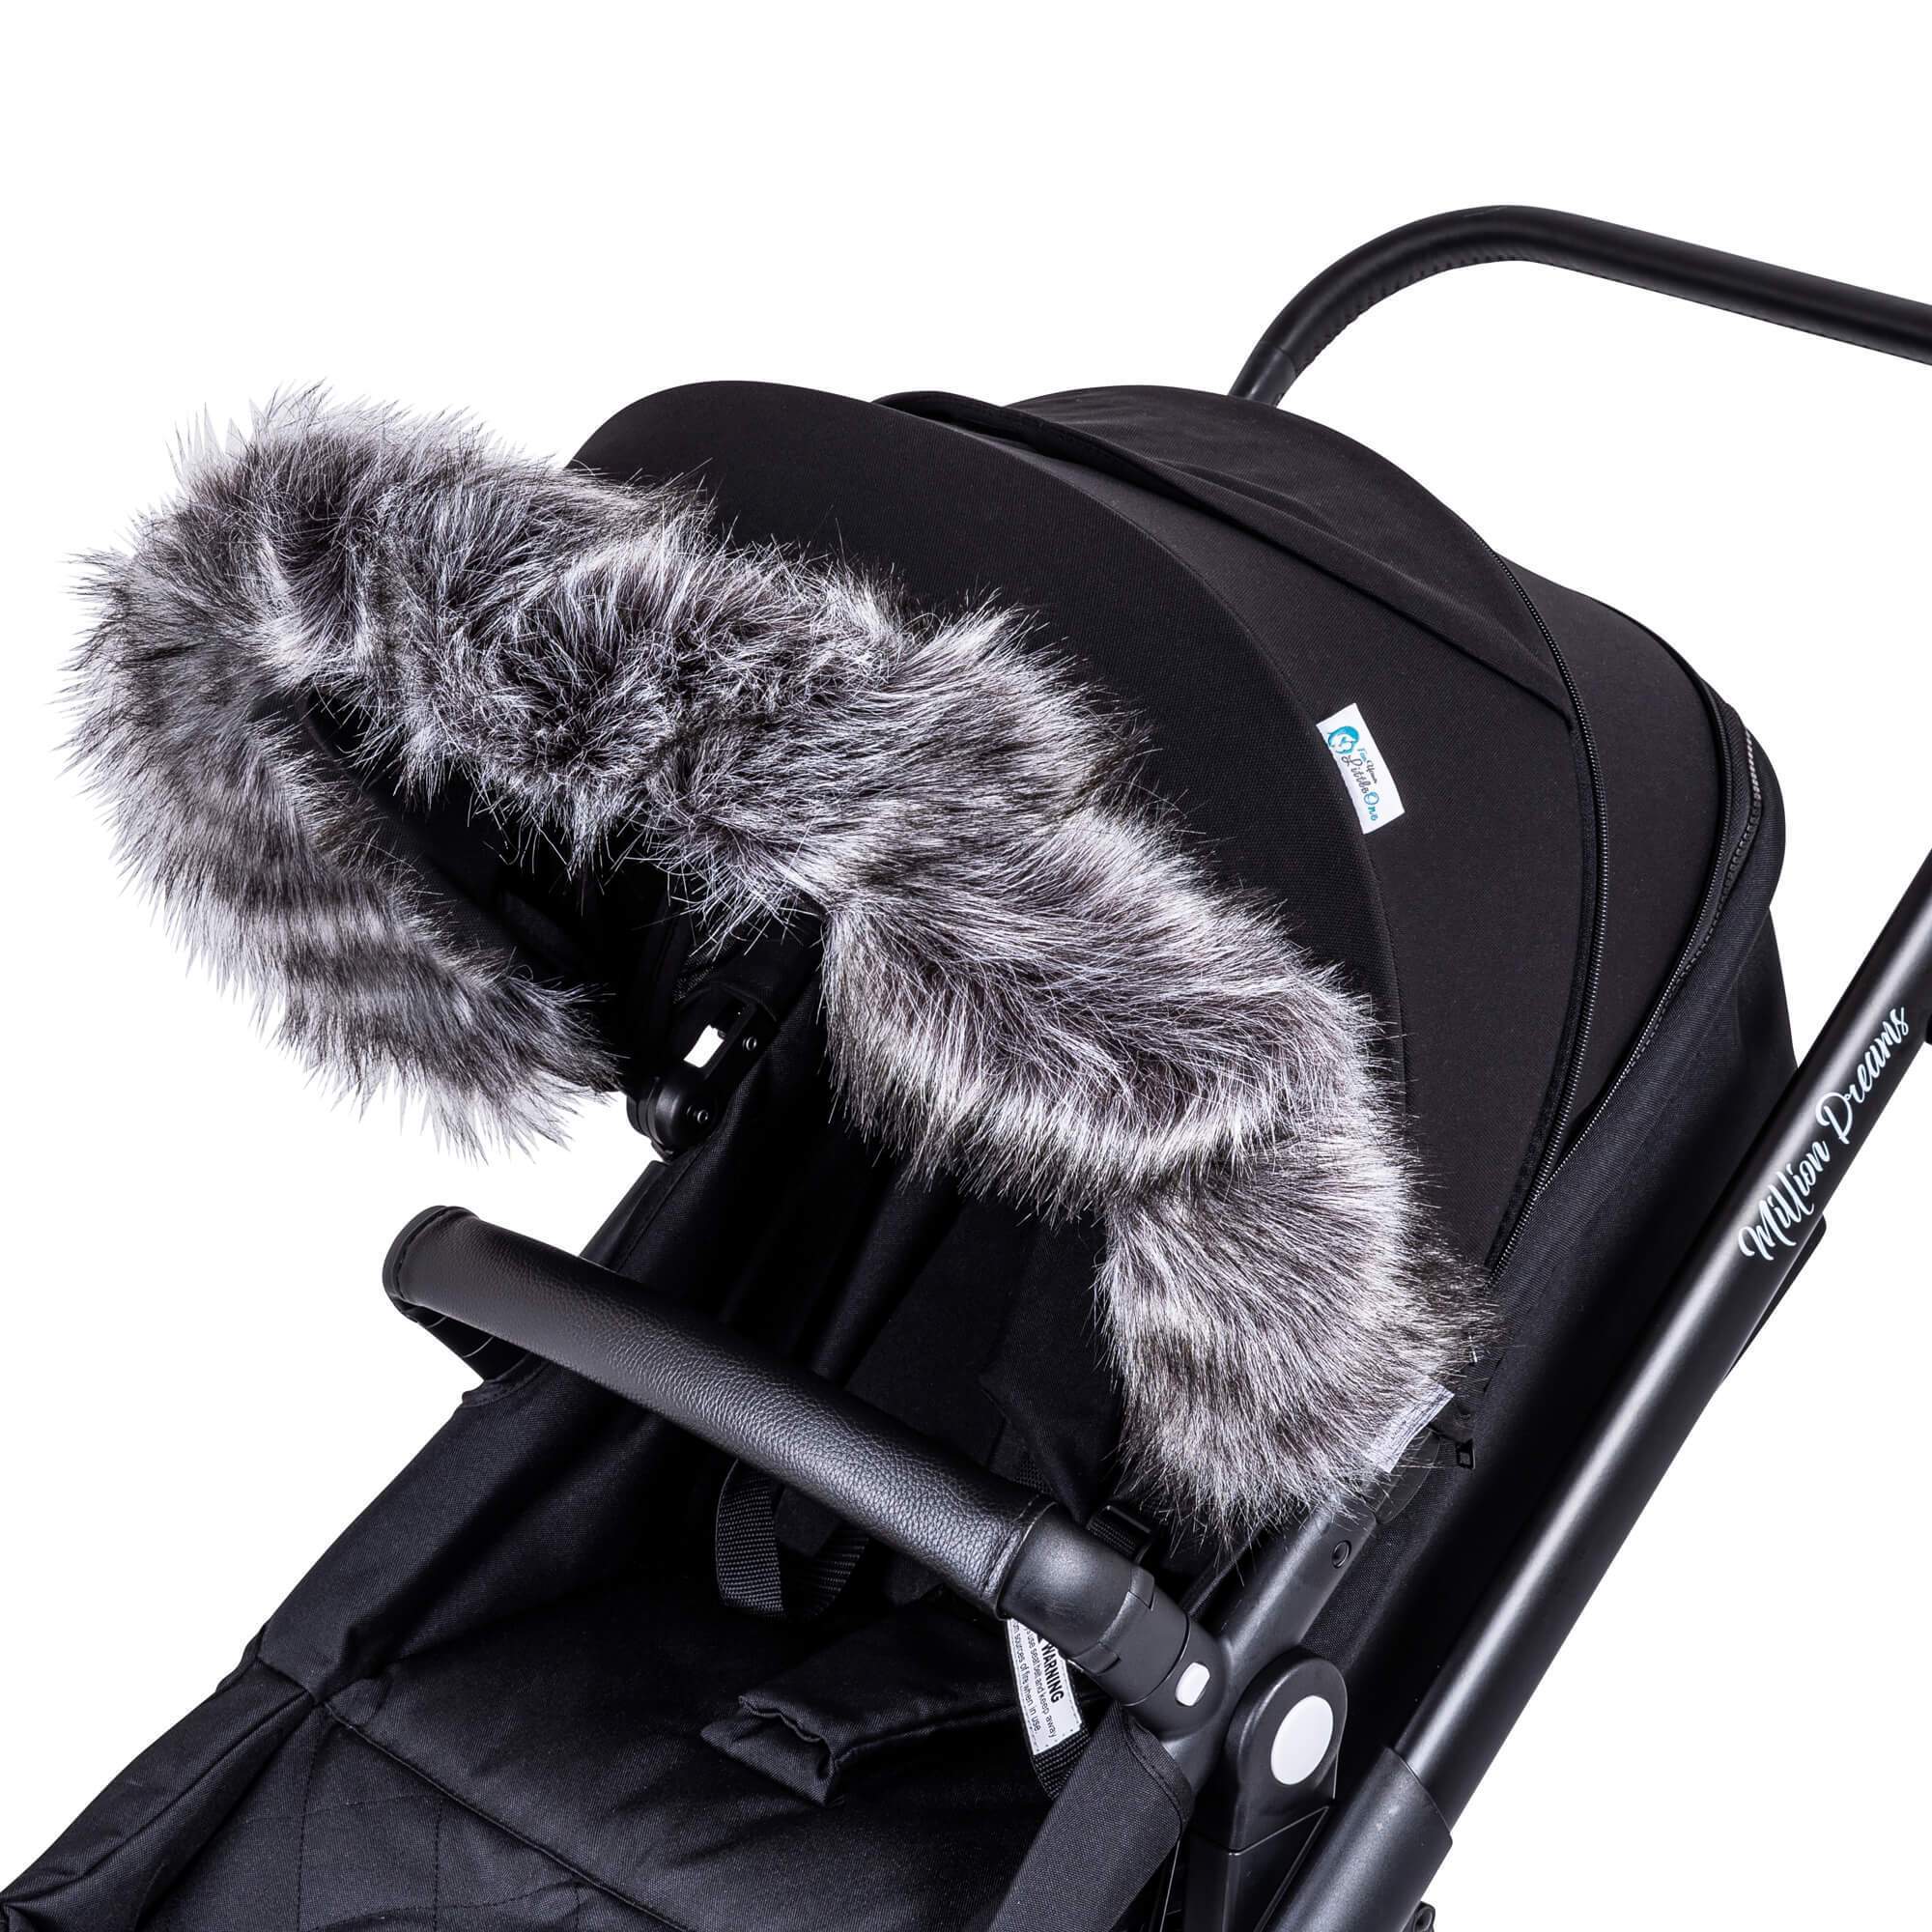 Pram Fur Hood Trim Attachment for Pushchair Compatible with Baby Jogger - For Your Little One